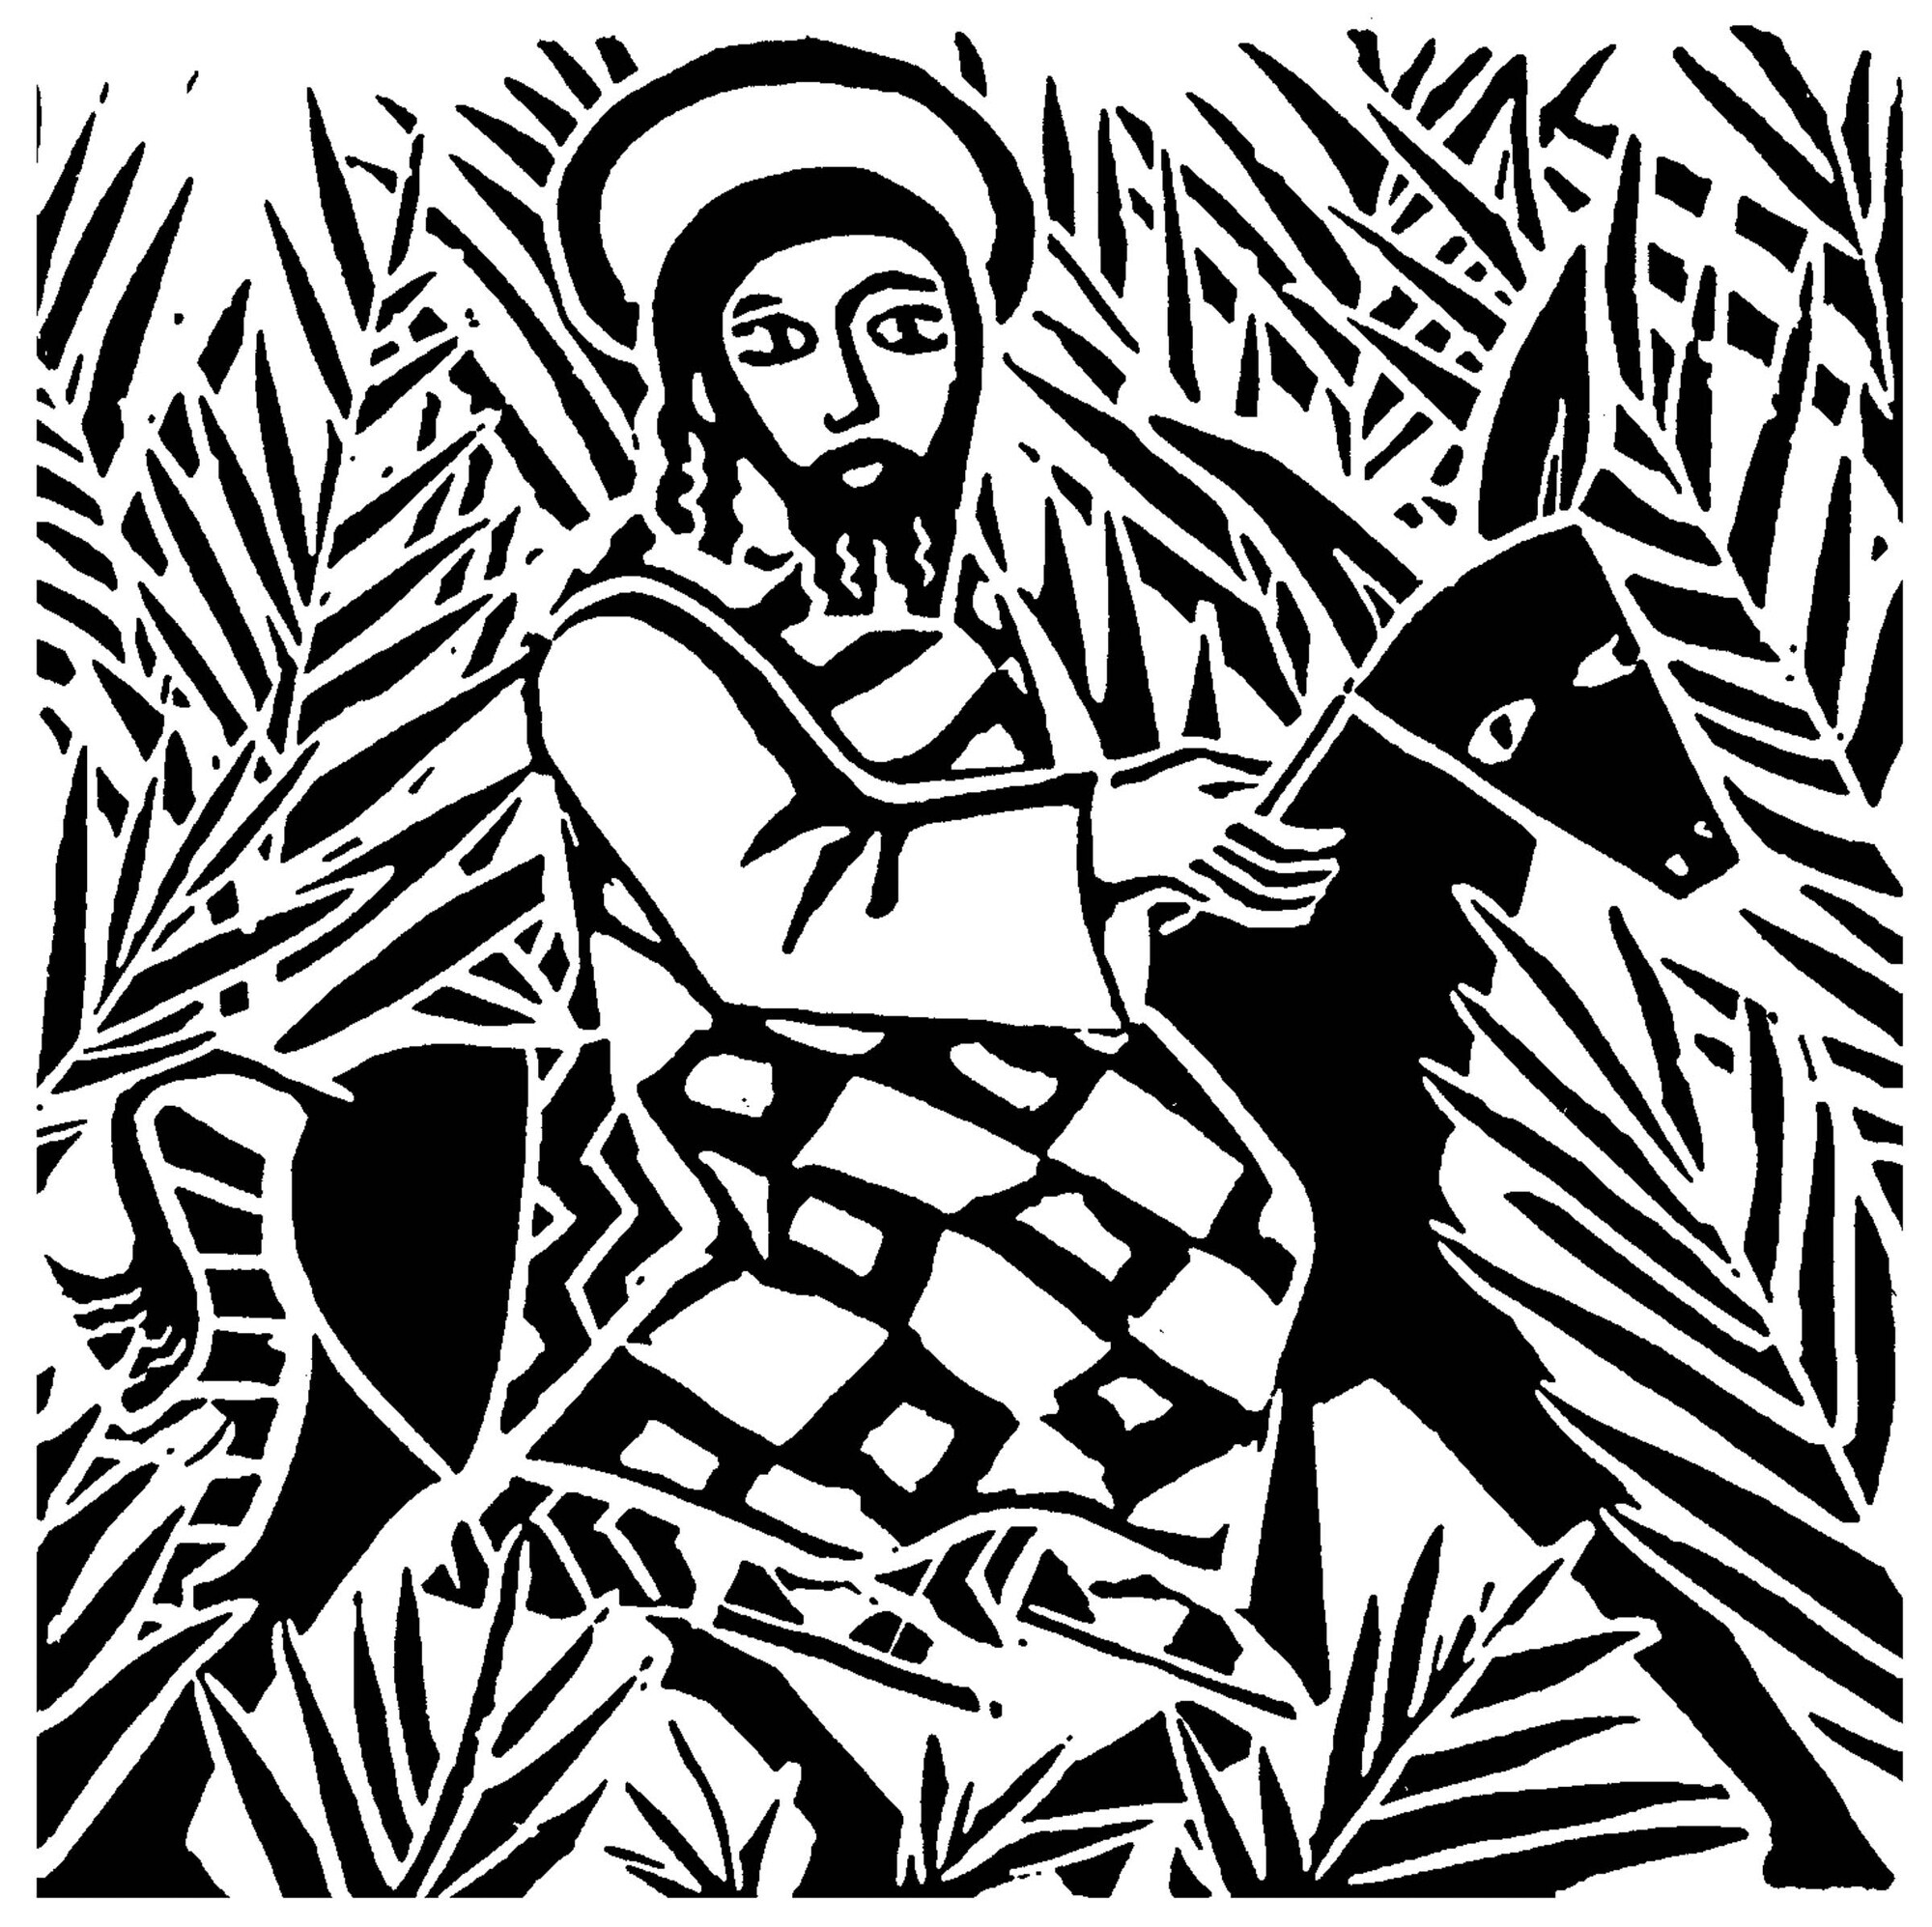 Black and white artwork of Jesus riding on a donkey surrounded by palm branches